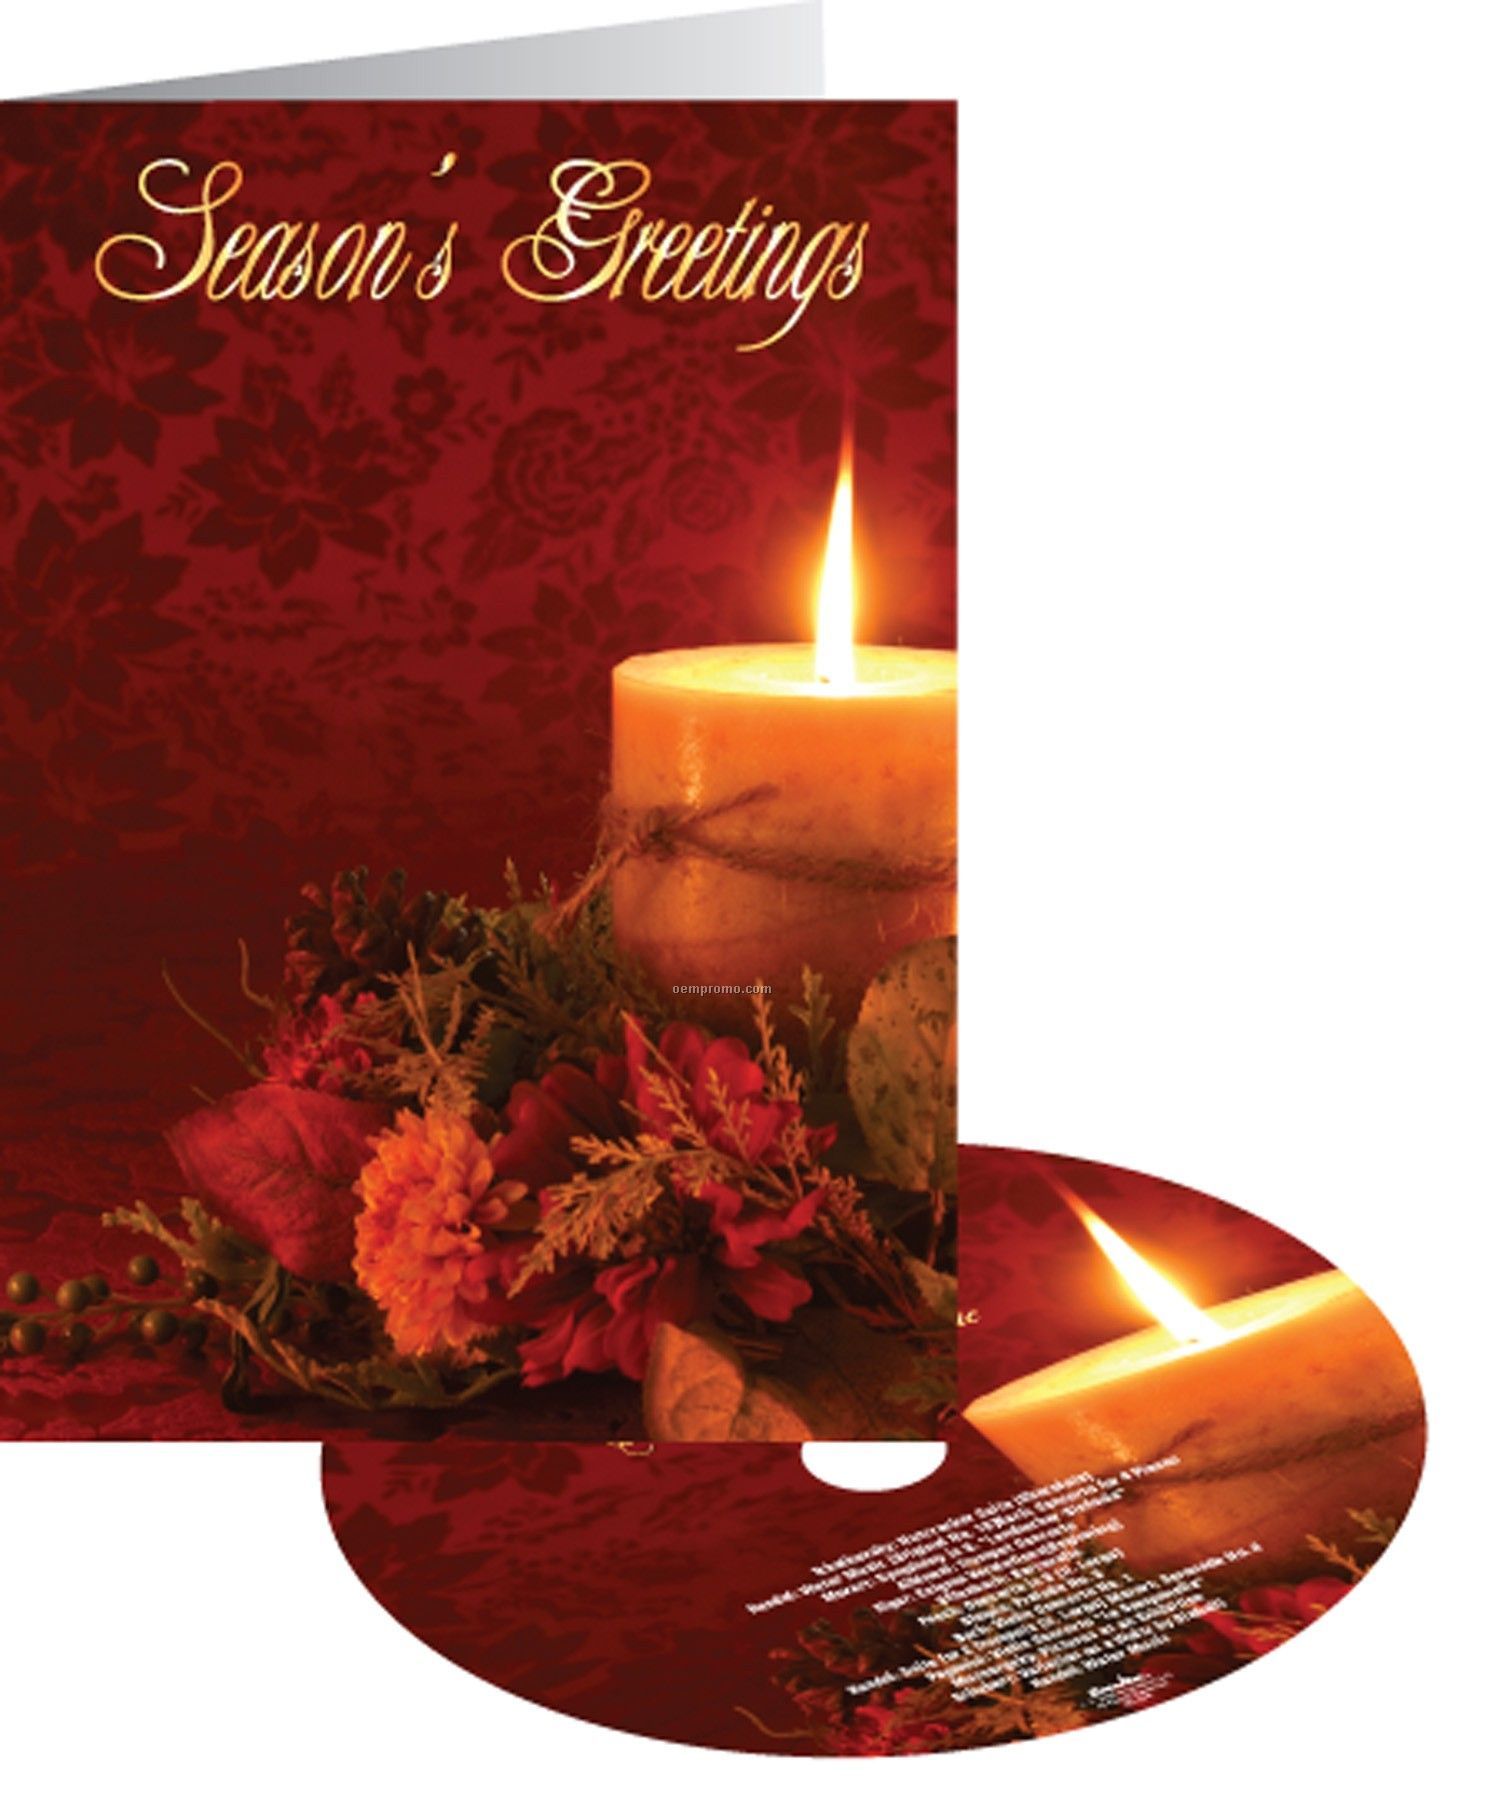 Floral Candle Season's Greetings Holiday Card With Matching CD